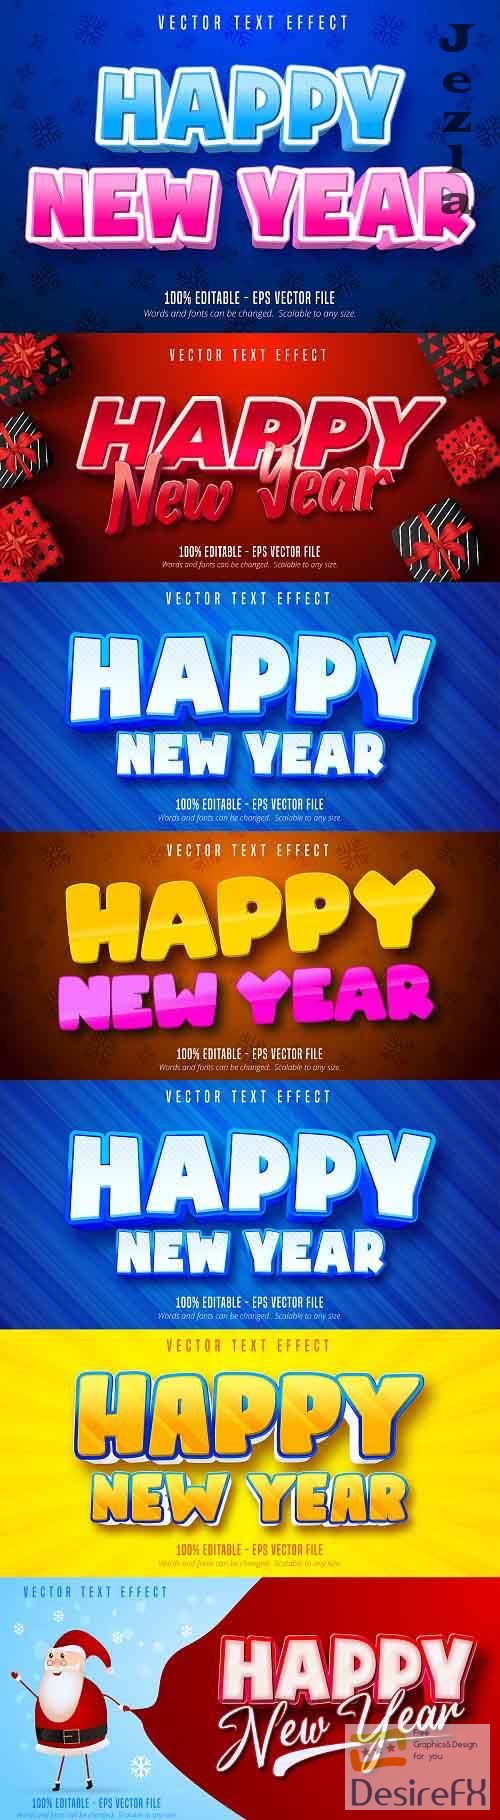 Editable font effect text collection illustration design 233 - Happy New Year